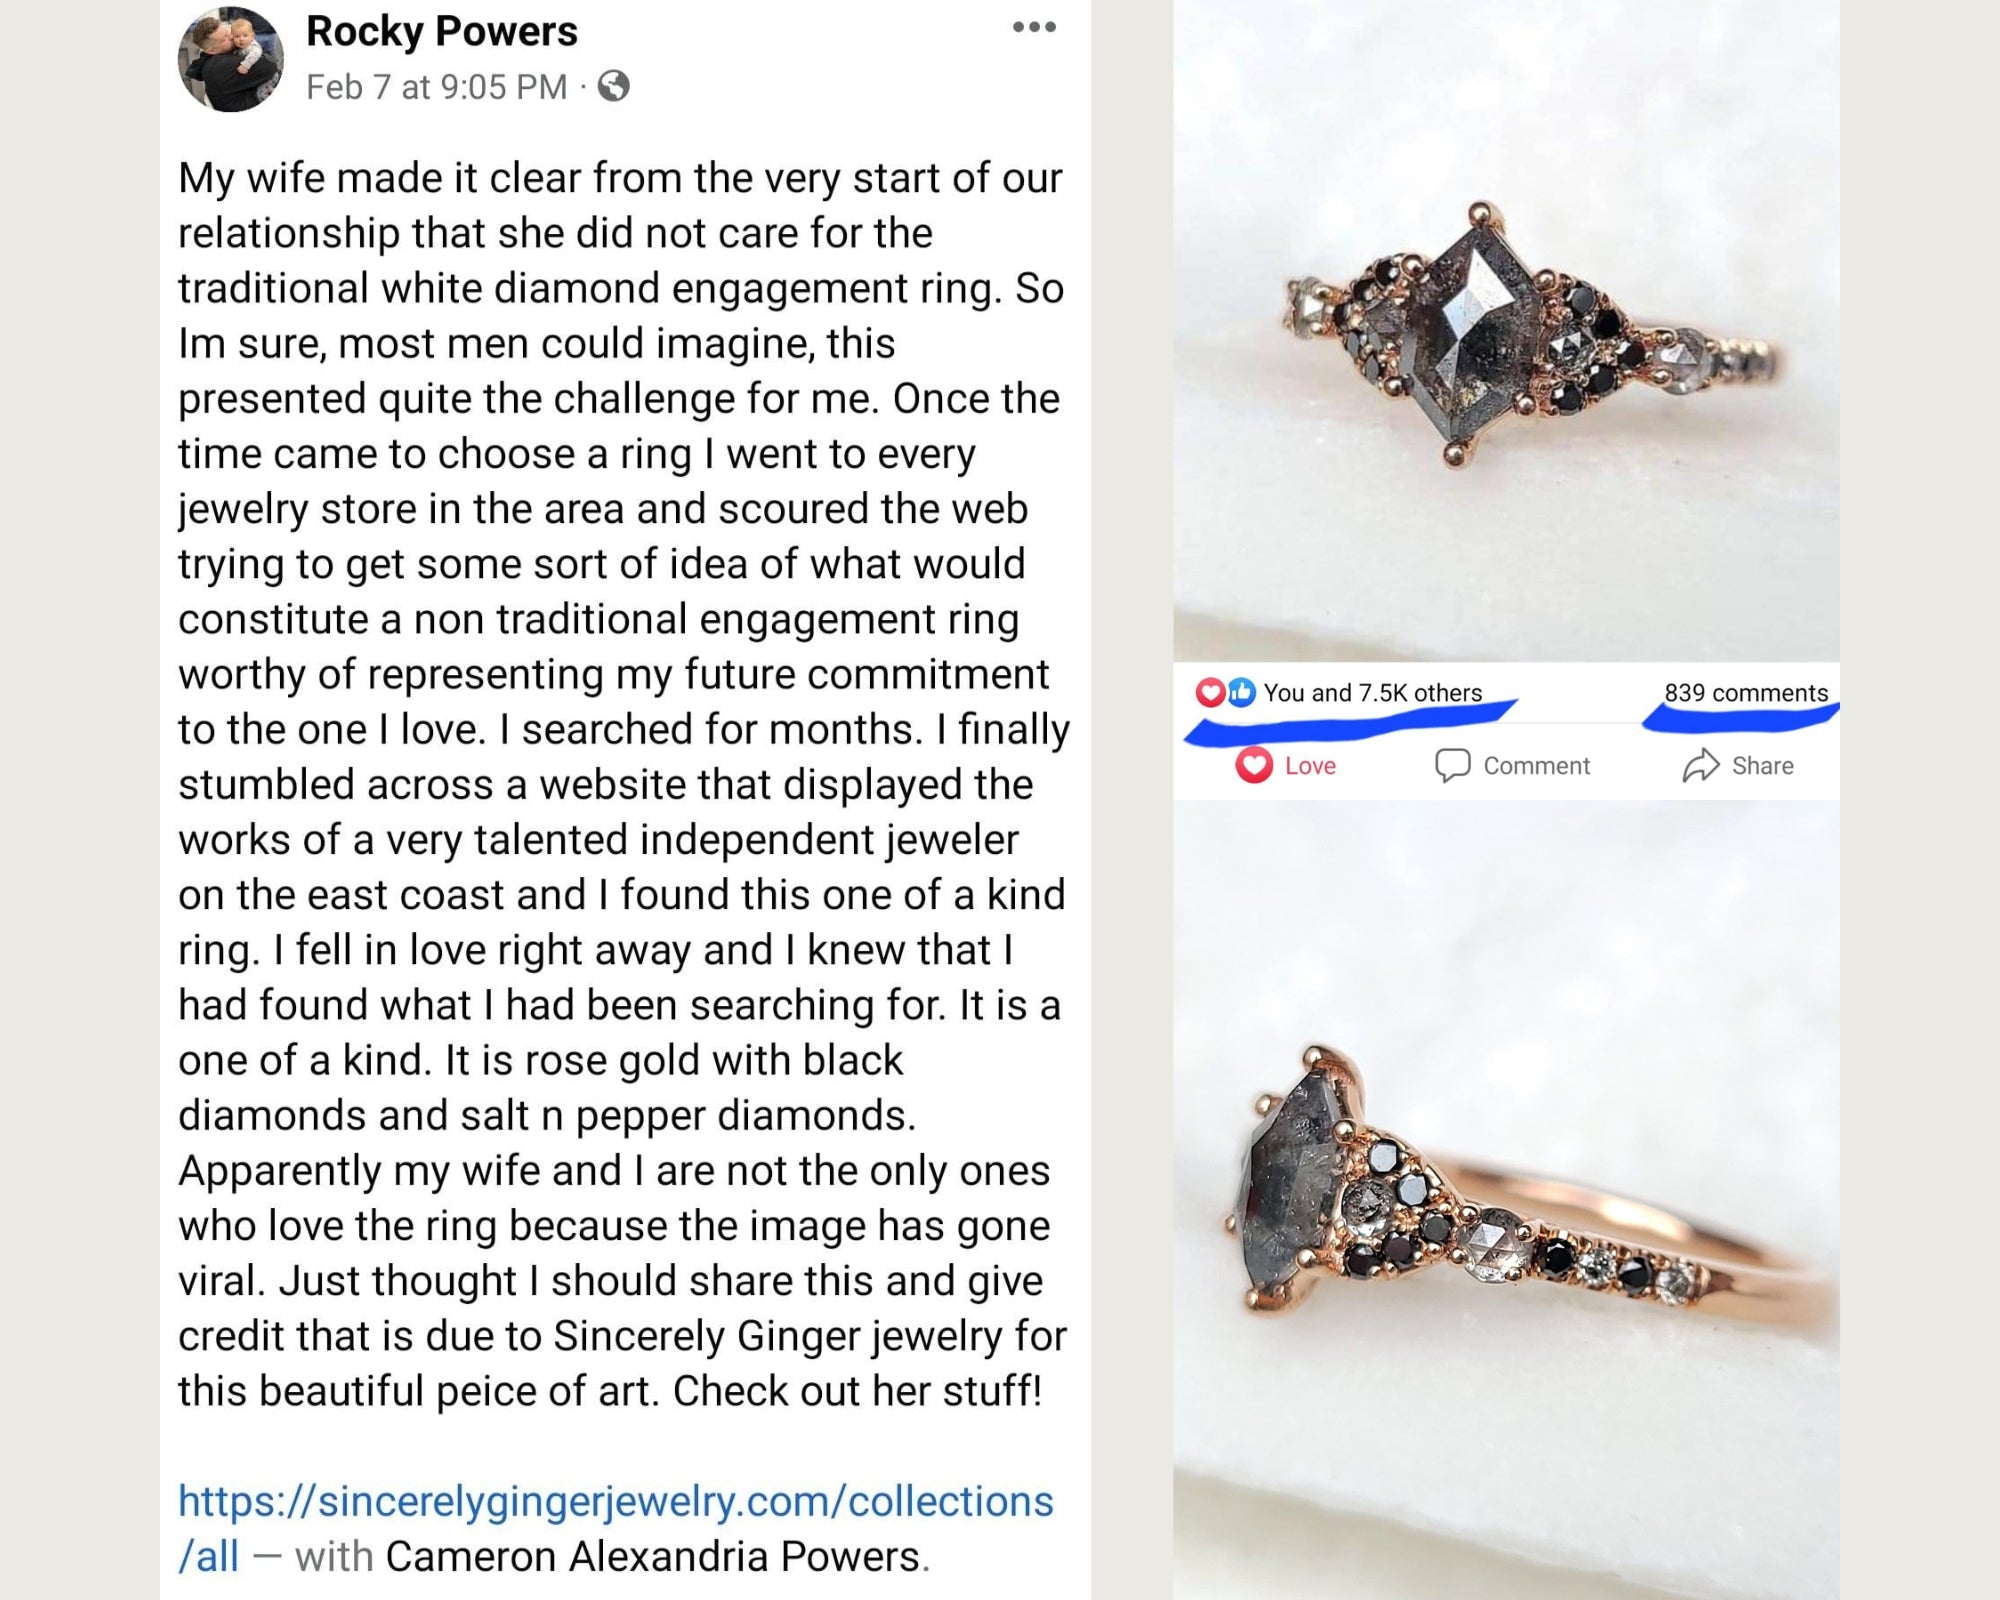 Sincerely Ginger Jewelry Diamond Engagement Ring Testimonial